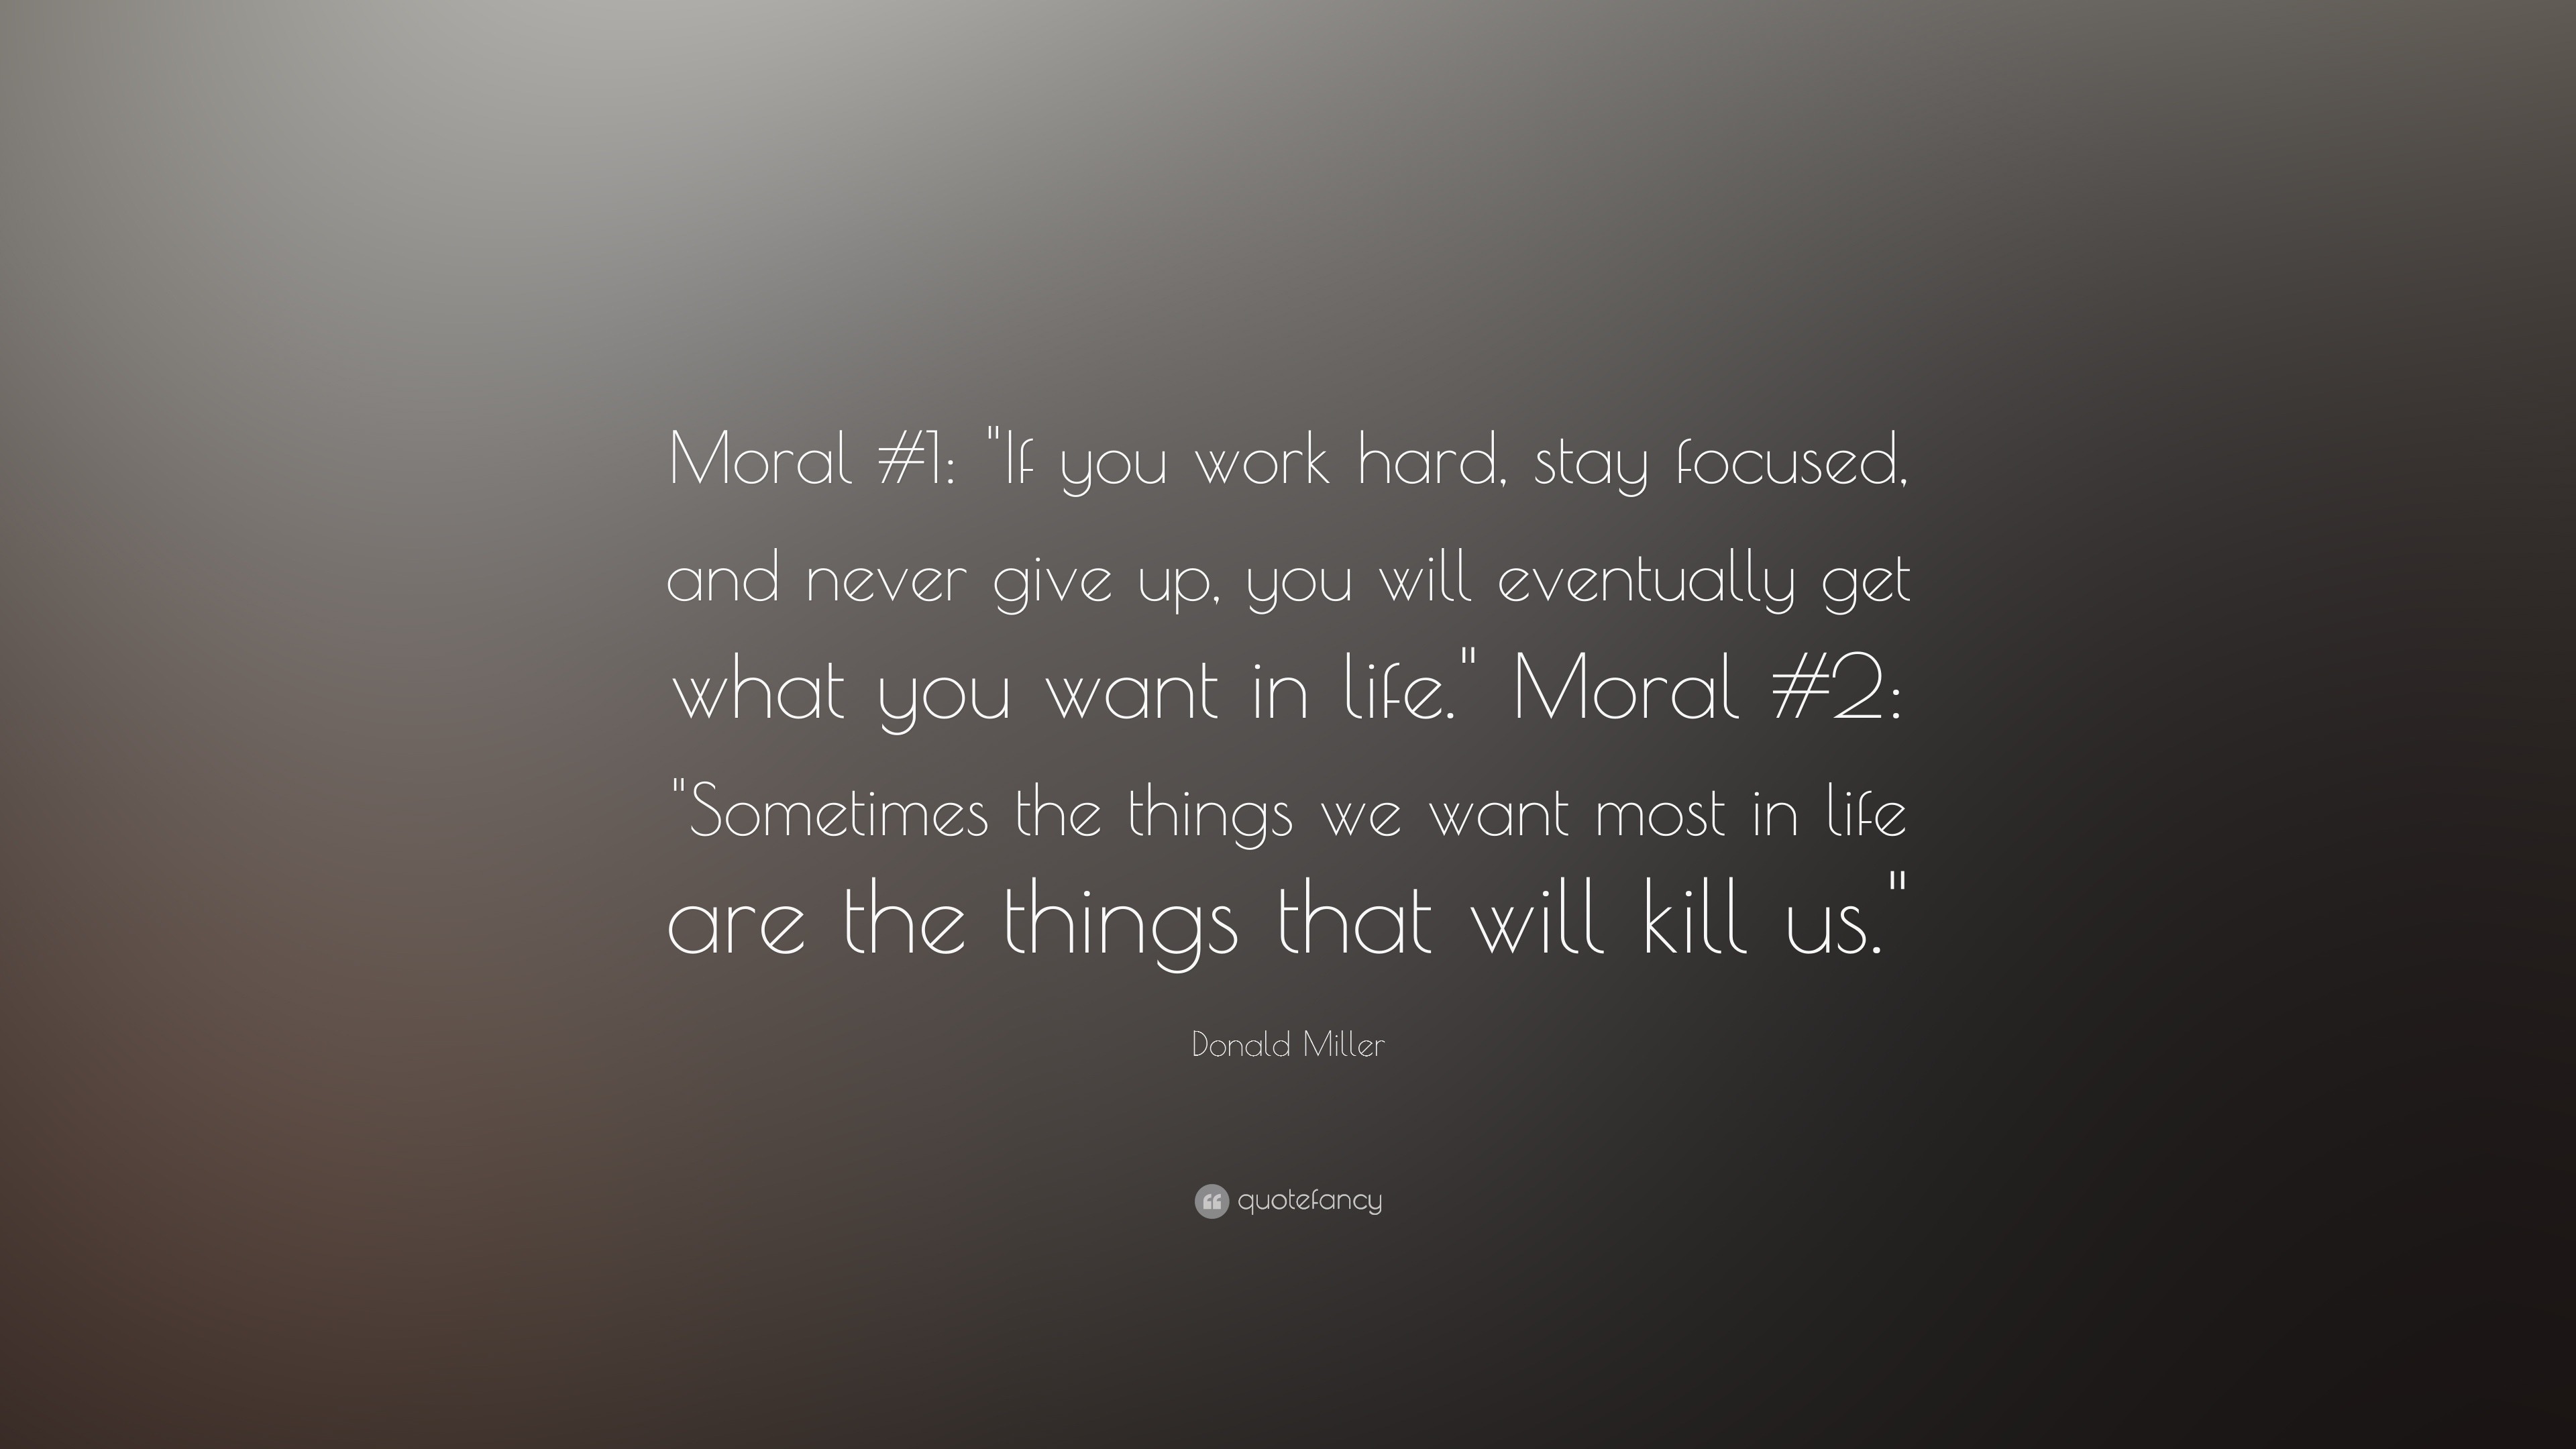 Donald Miller Quote “Moral 1 "If you work hard stay